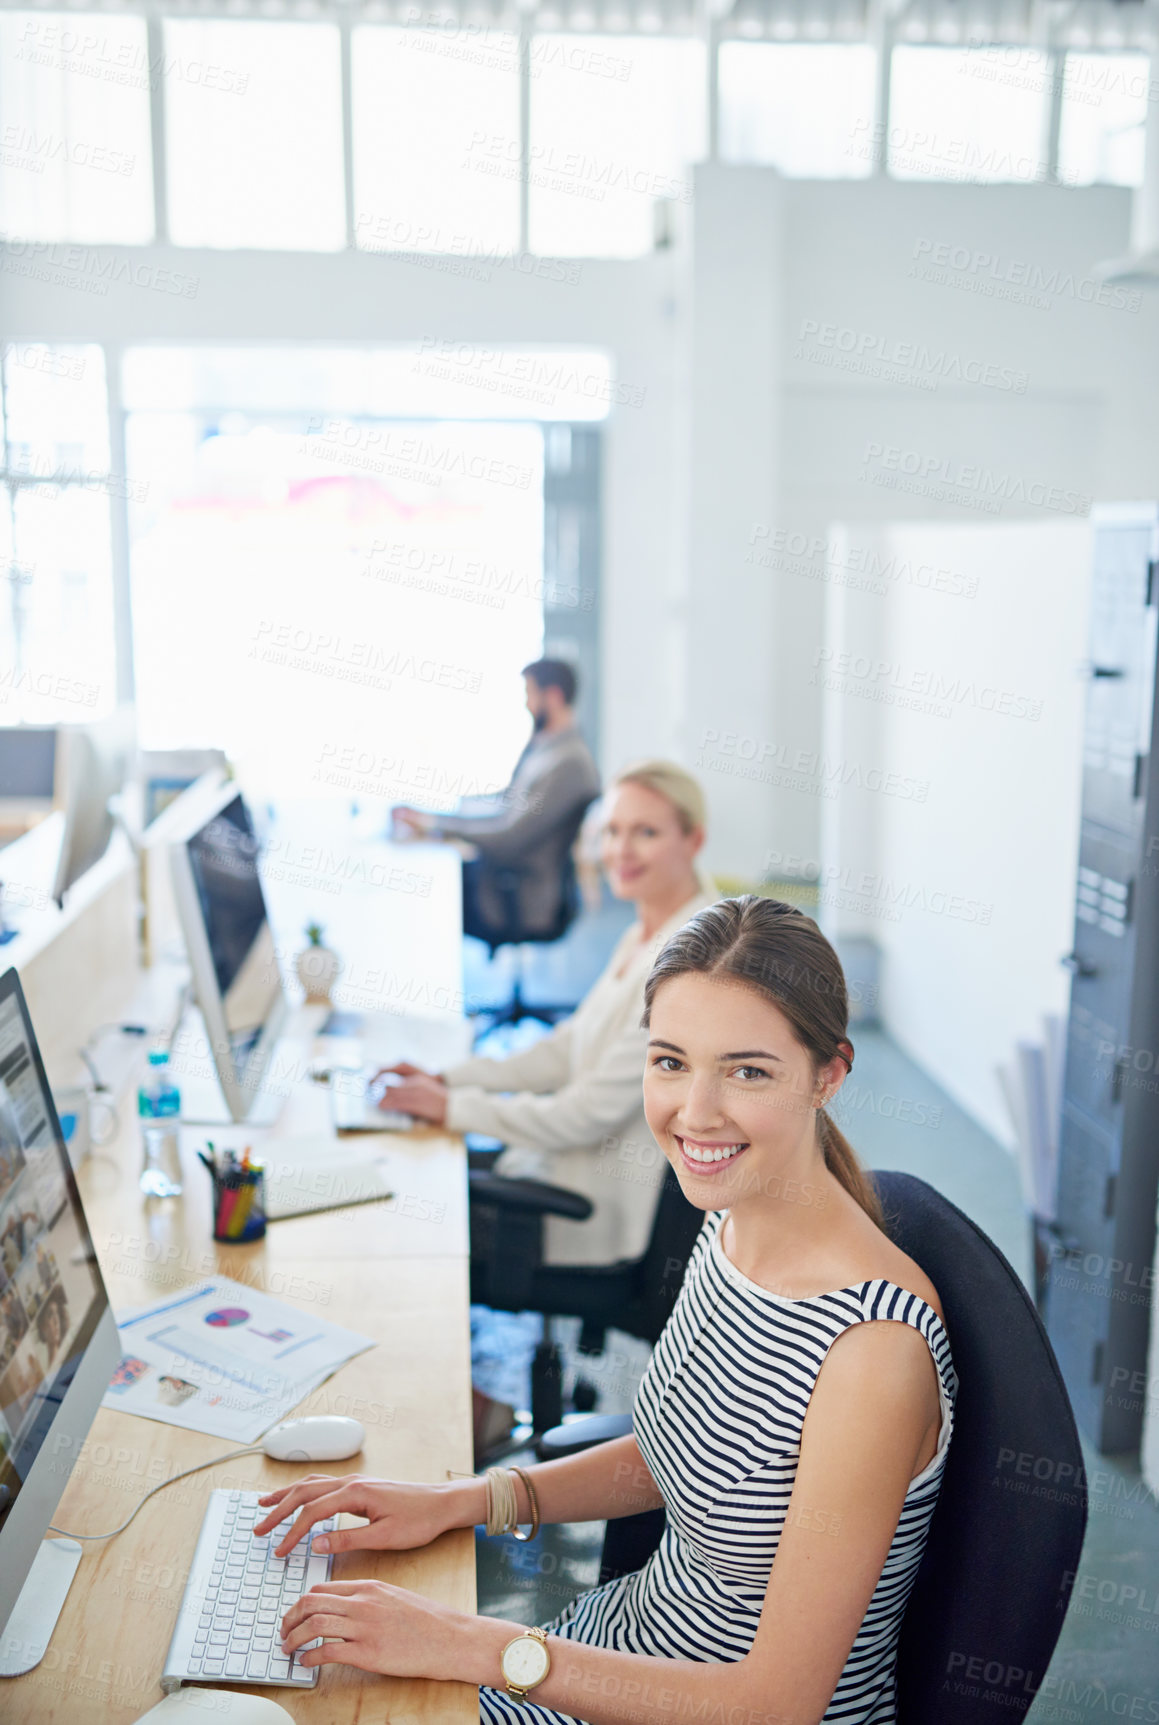 Buy stock photo Portrait of a young office worker sitting at her workstation in an office